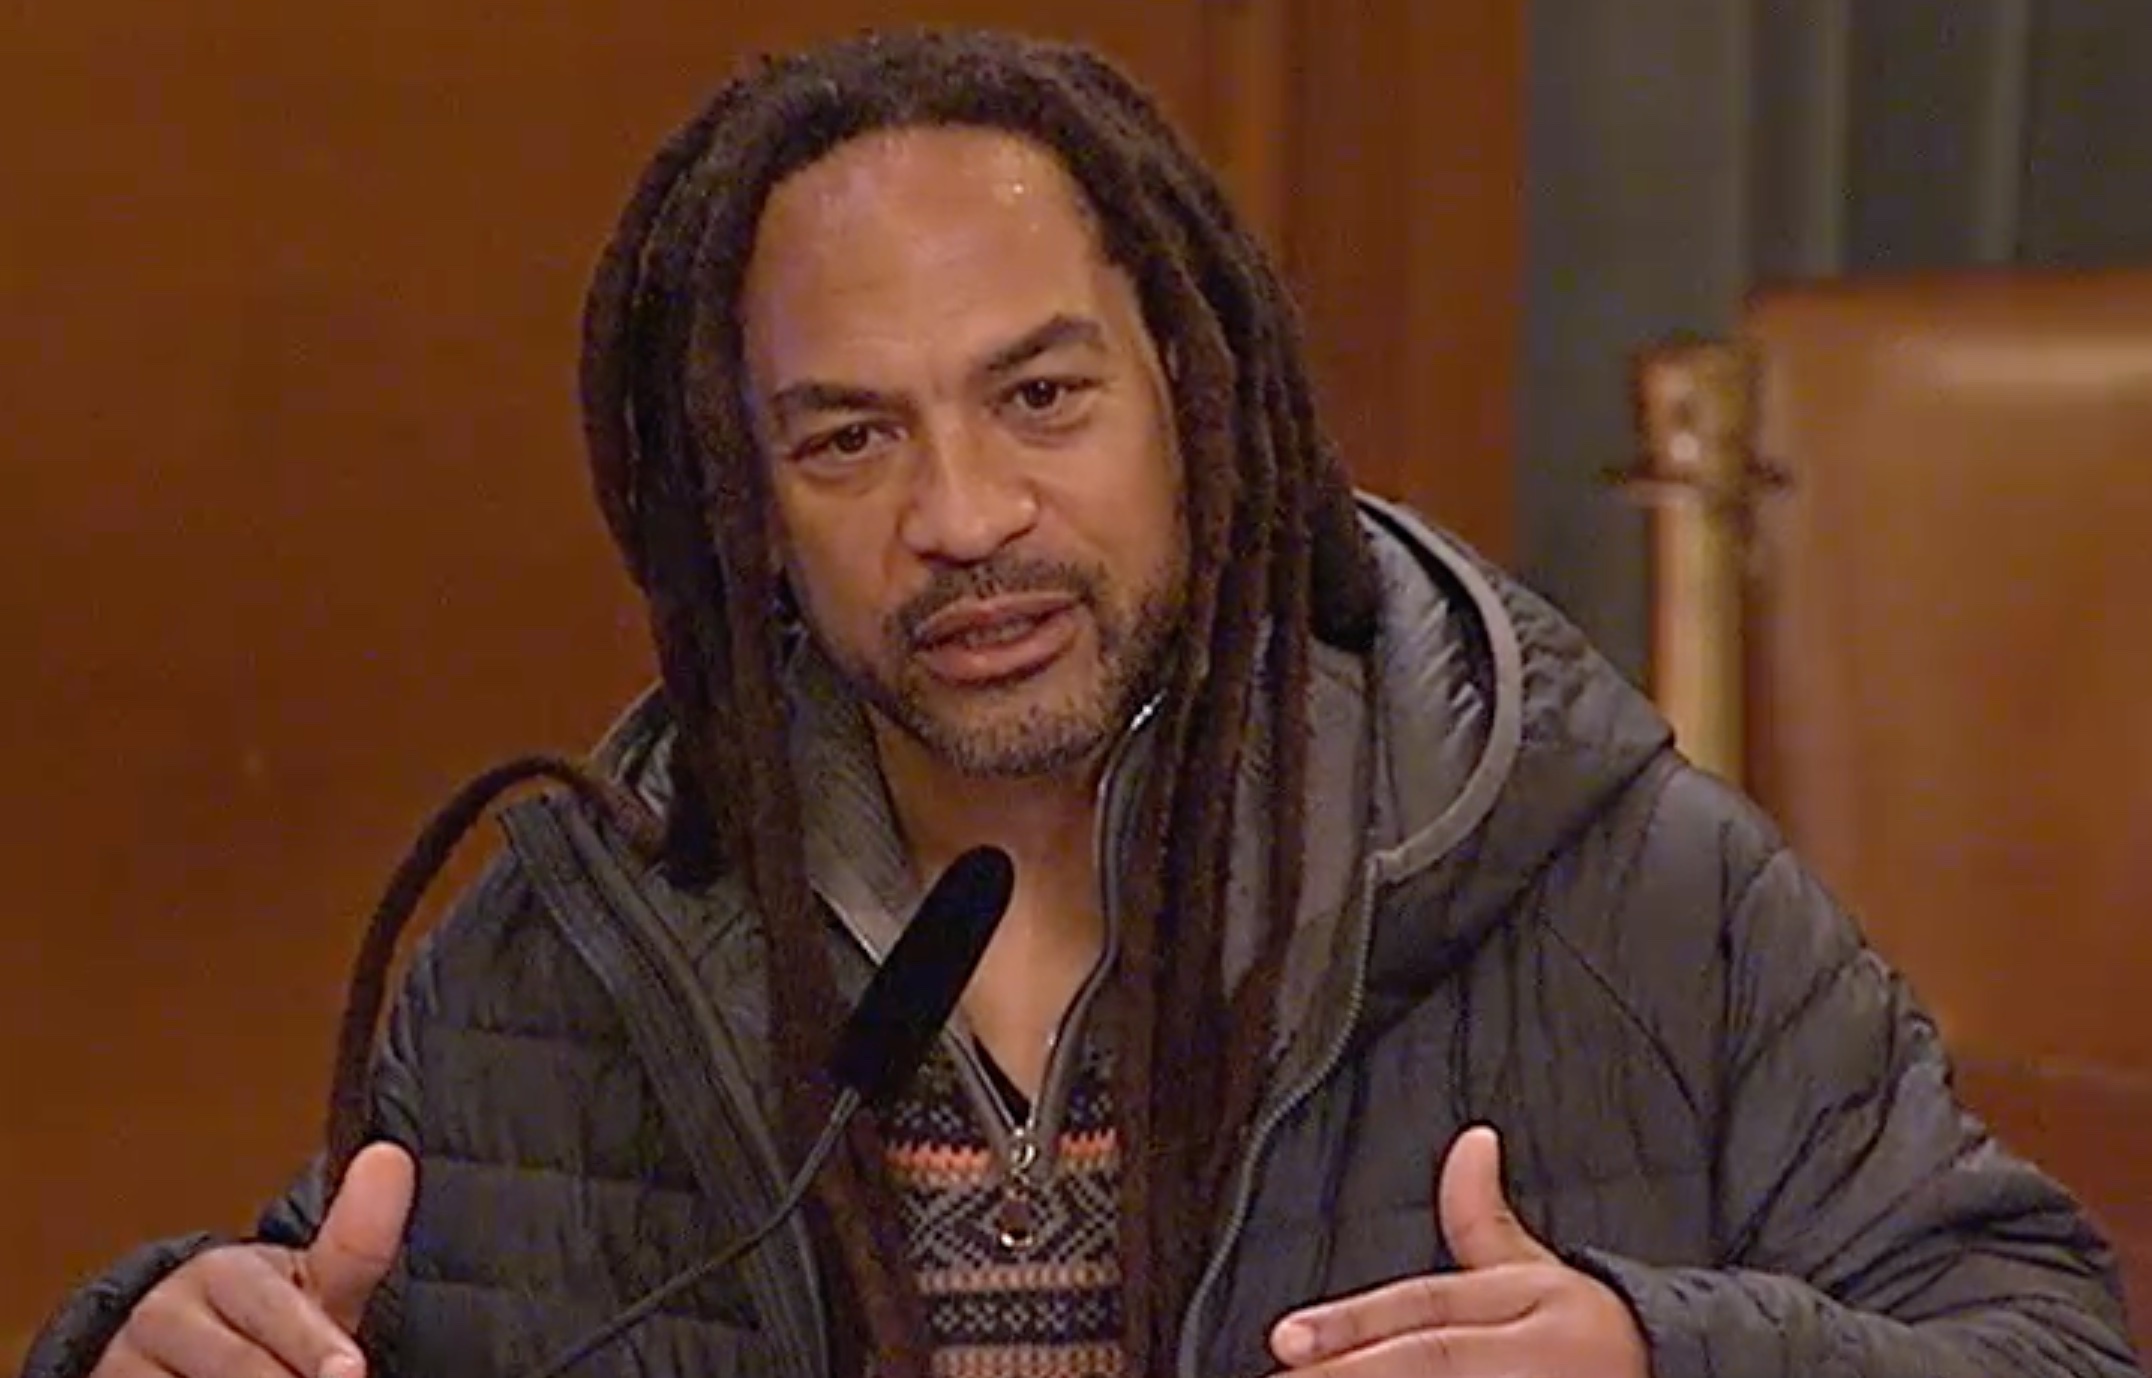 A man with dreadlocks speaks into a microphone.